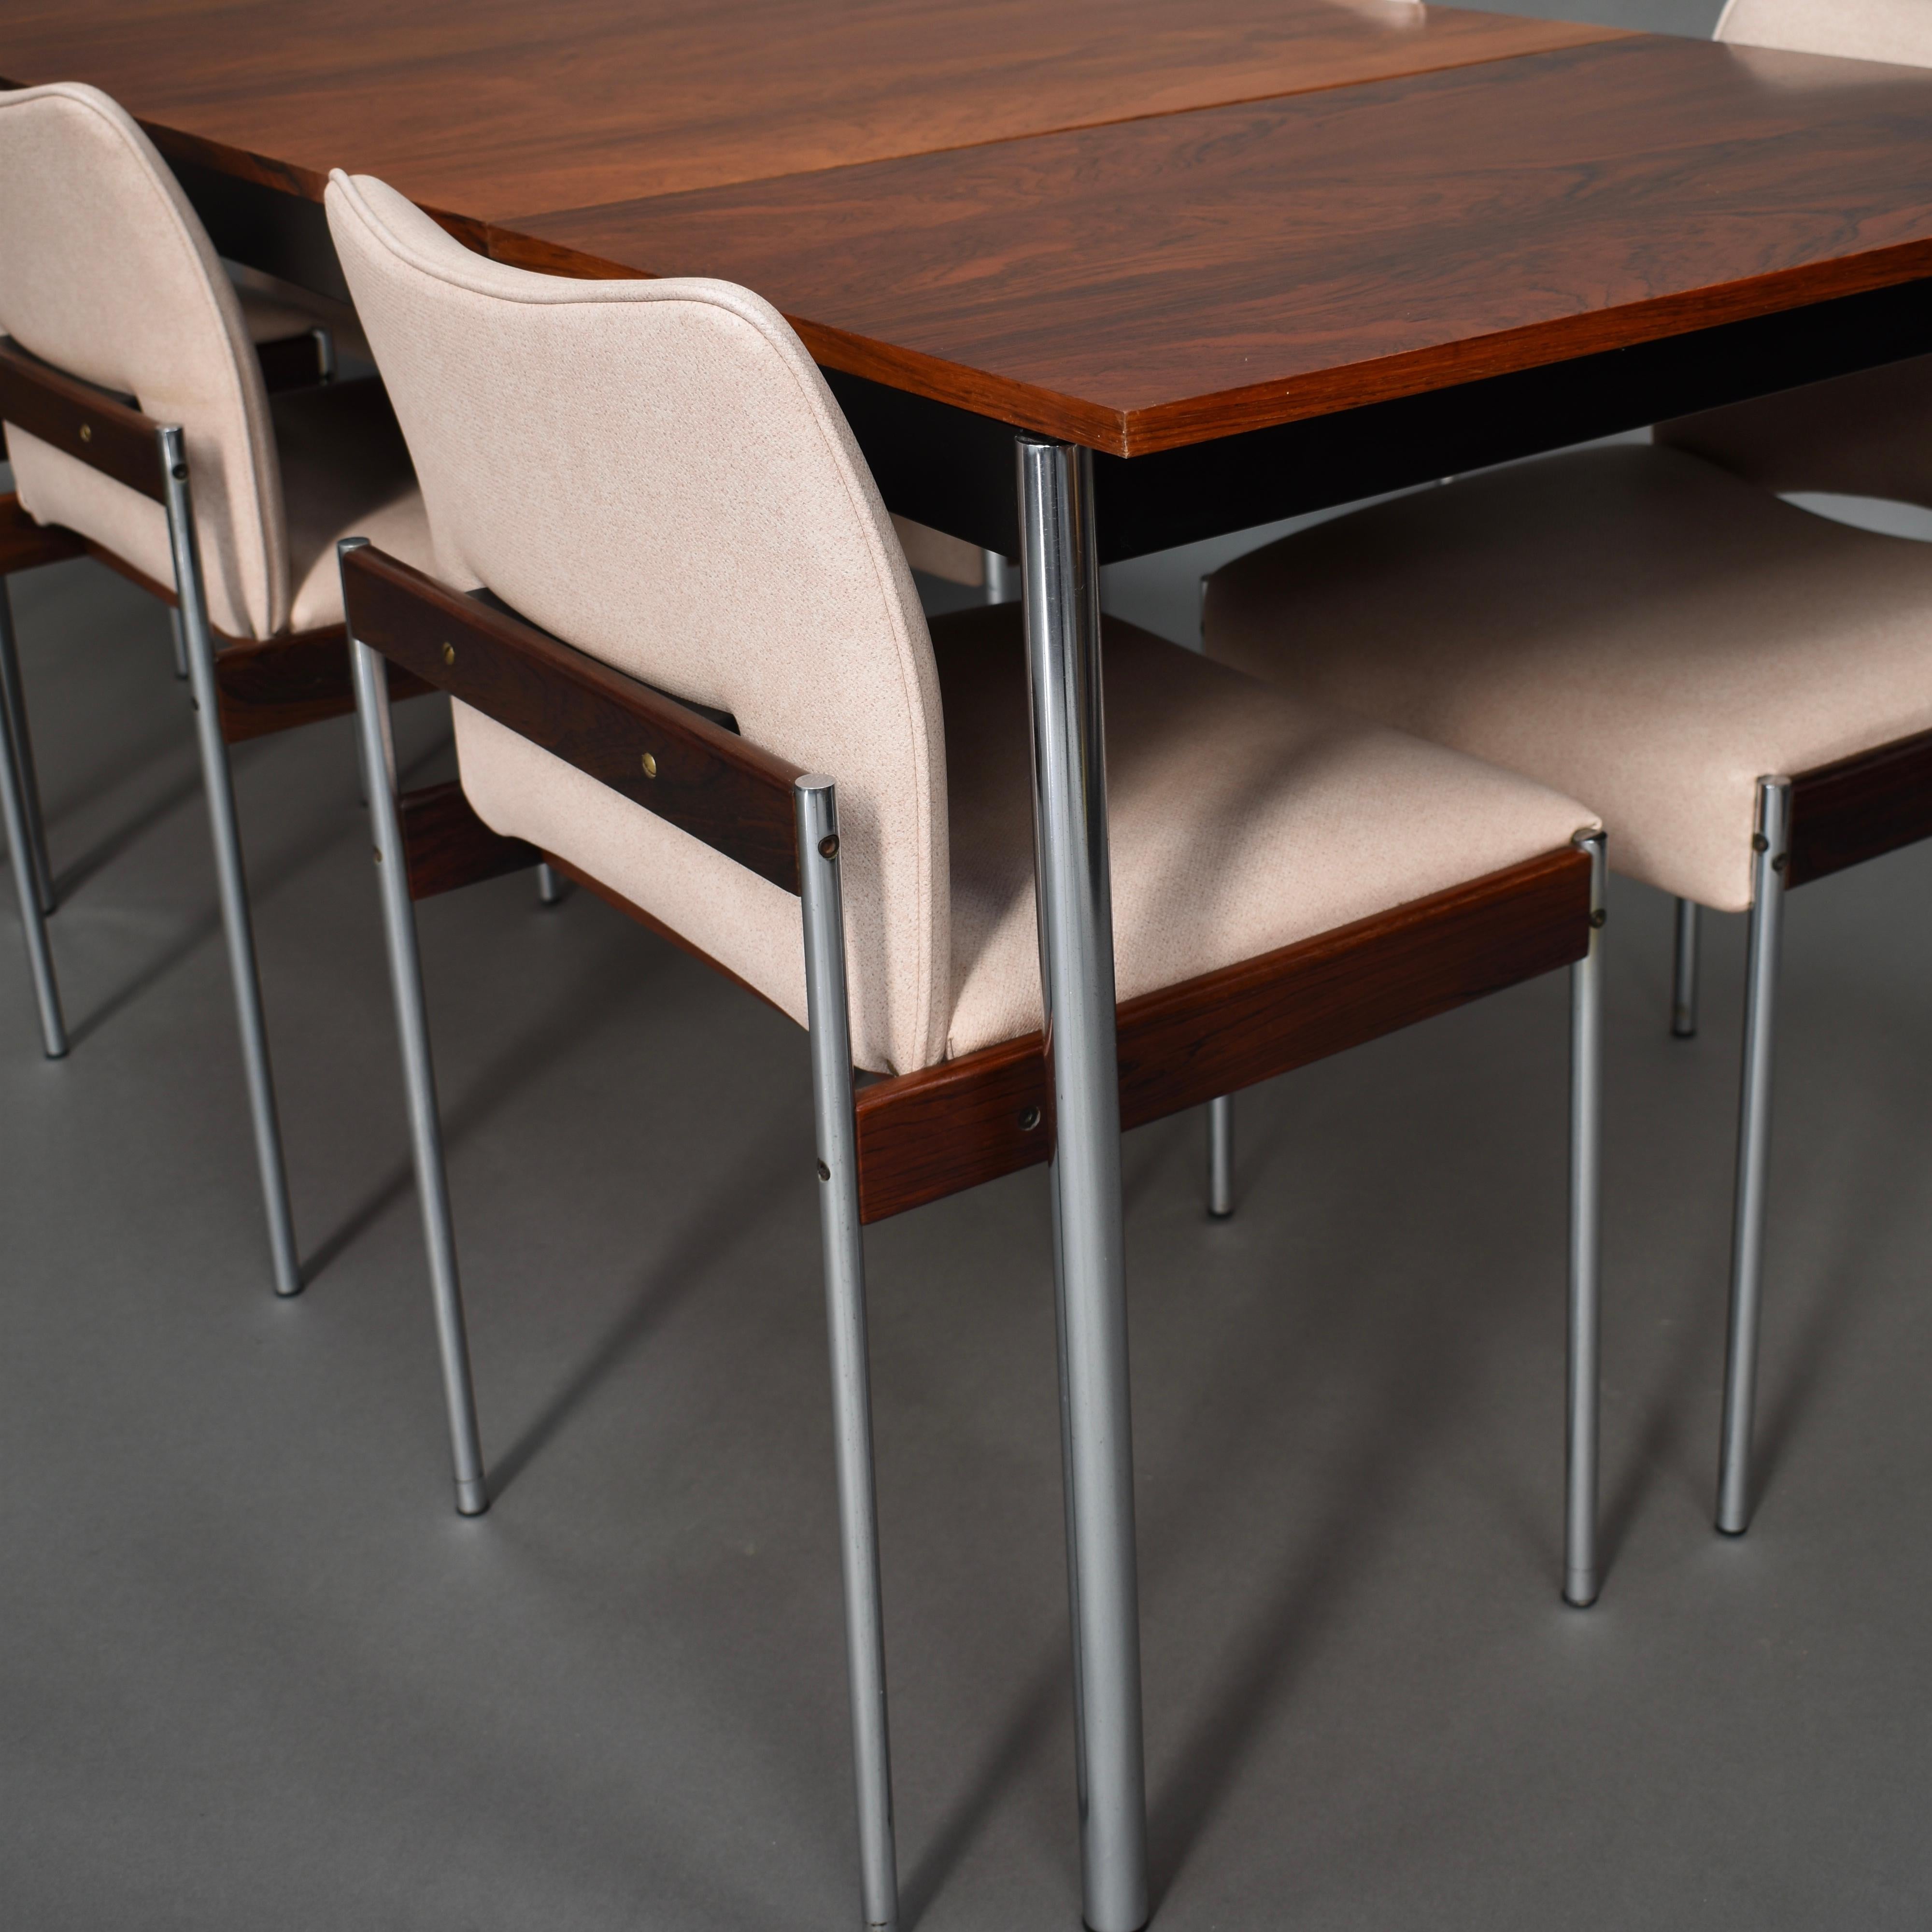 Leather Italian Walnut and Chrome Dining Set by Thereca, Netherlands, 1960s